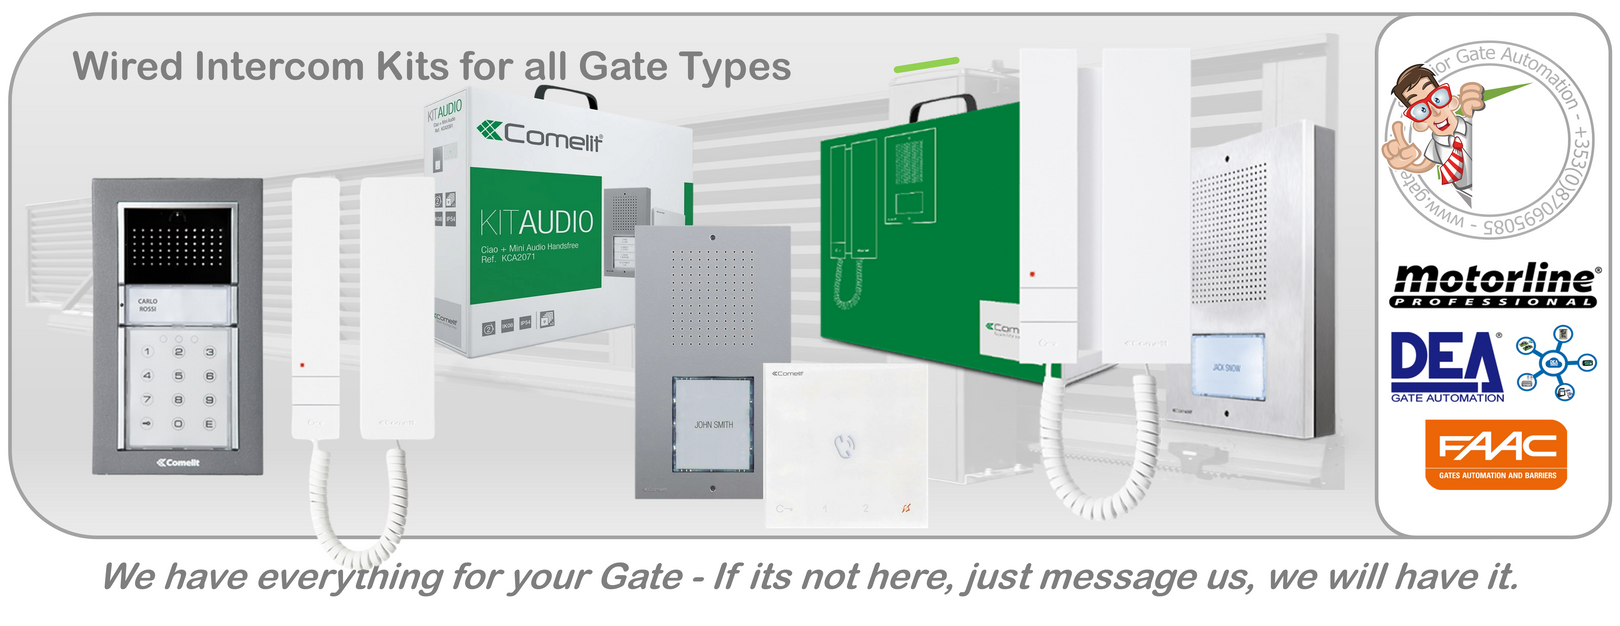 Wired Intercom Kits for all Gate Types